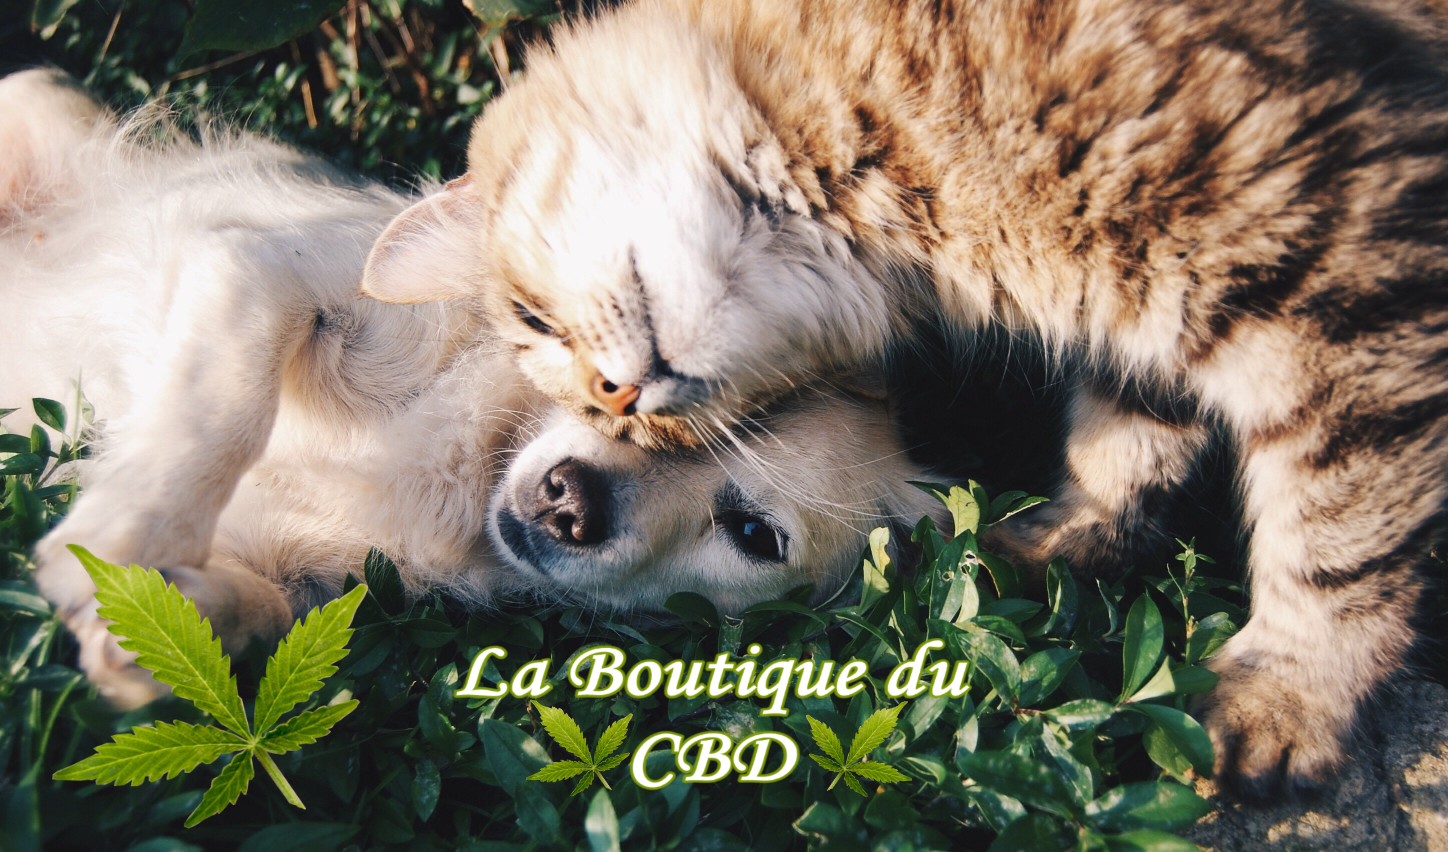 HUILE CBD POUR ANIMAUX TORCY 77